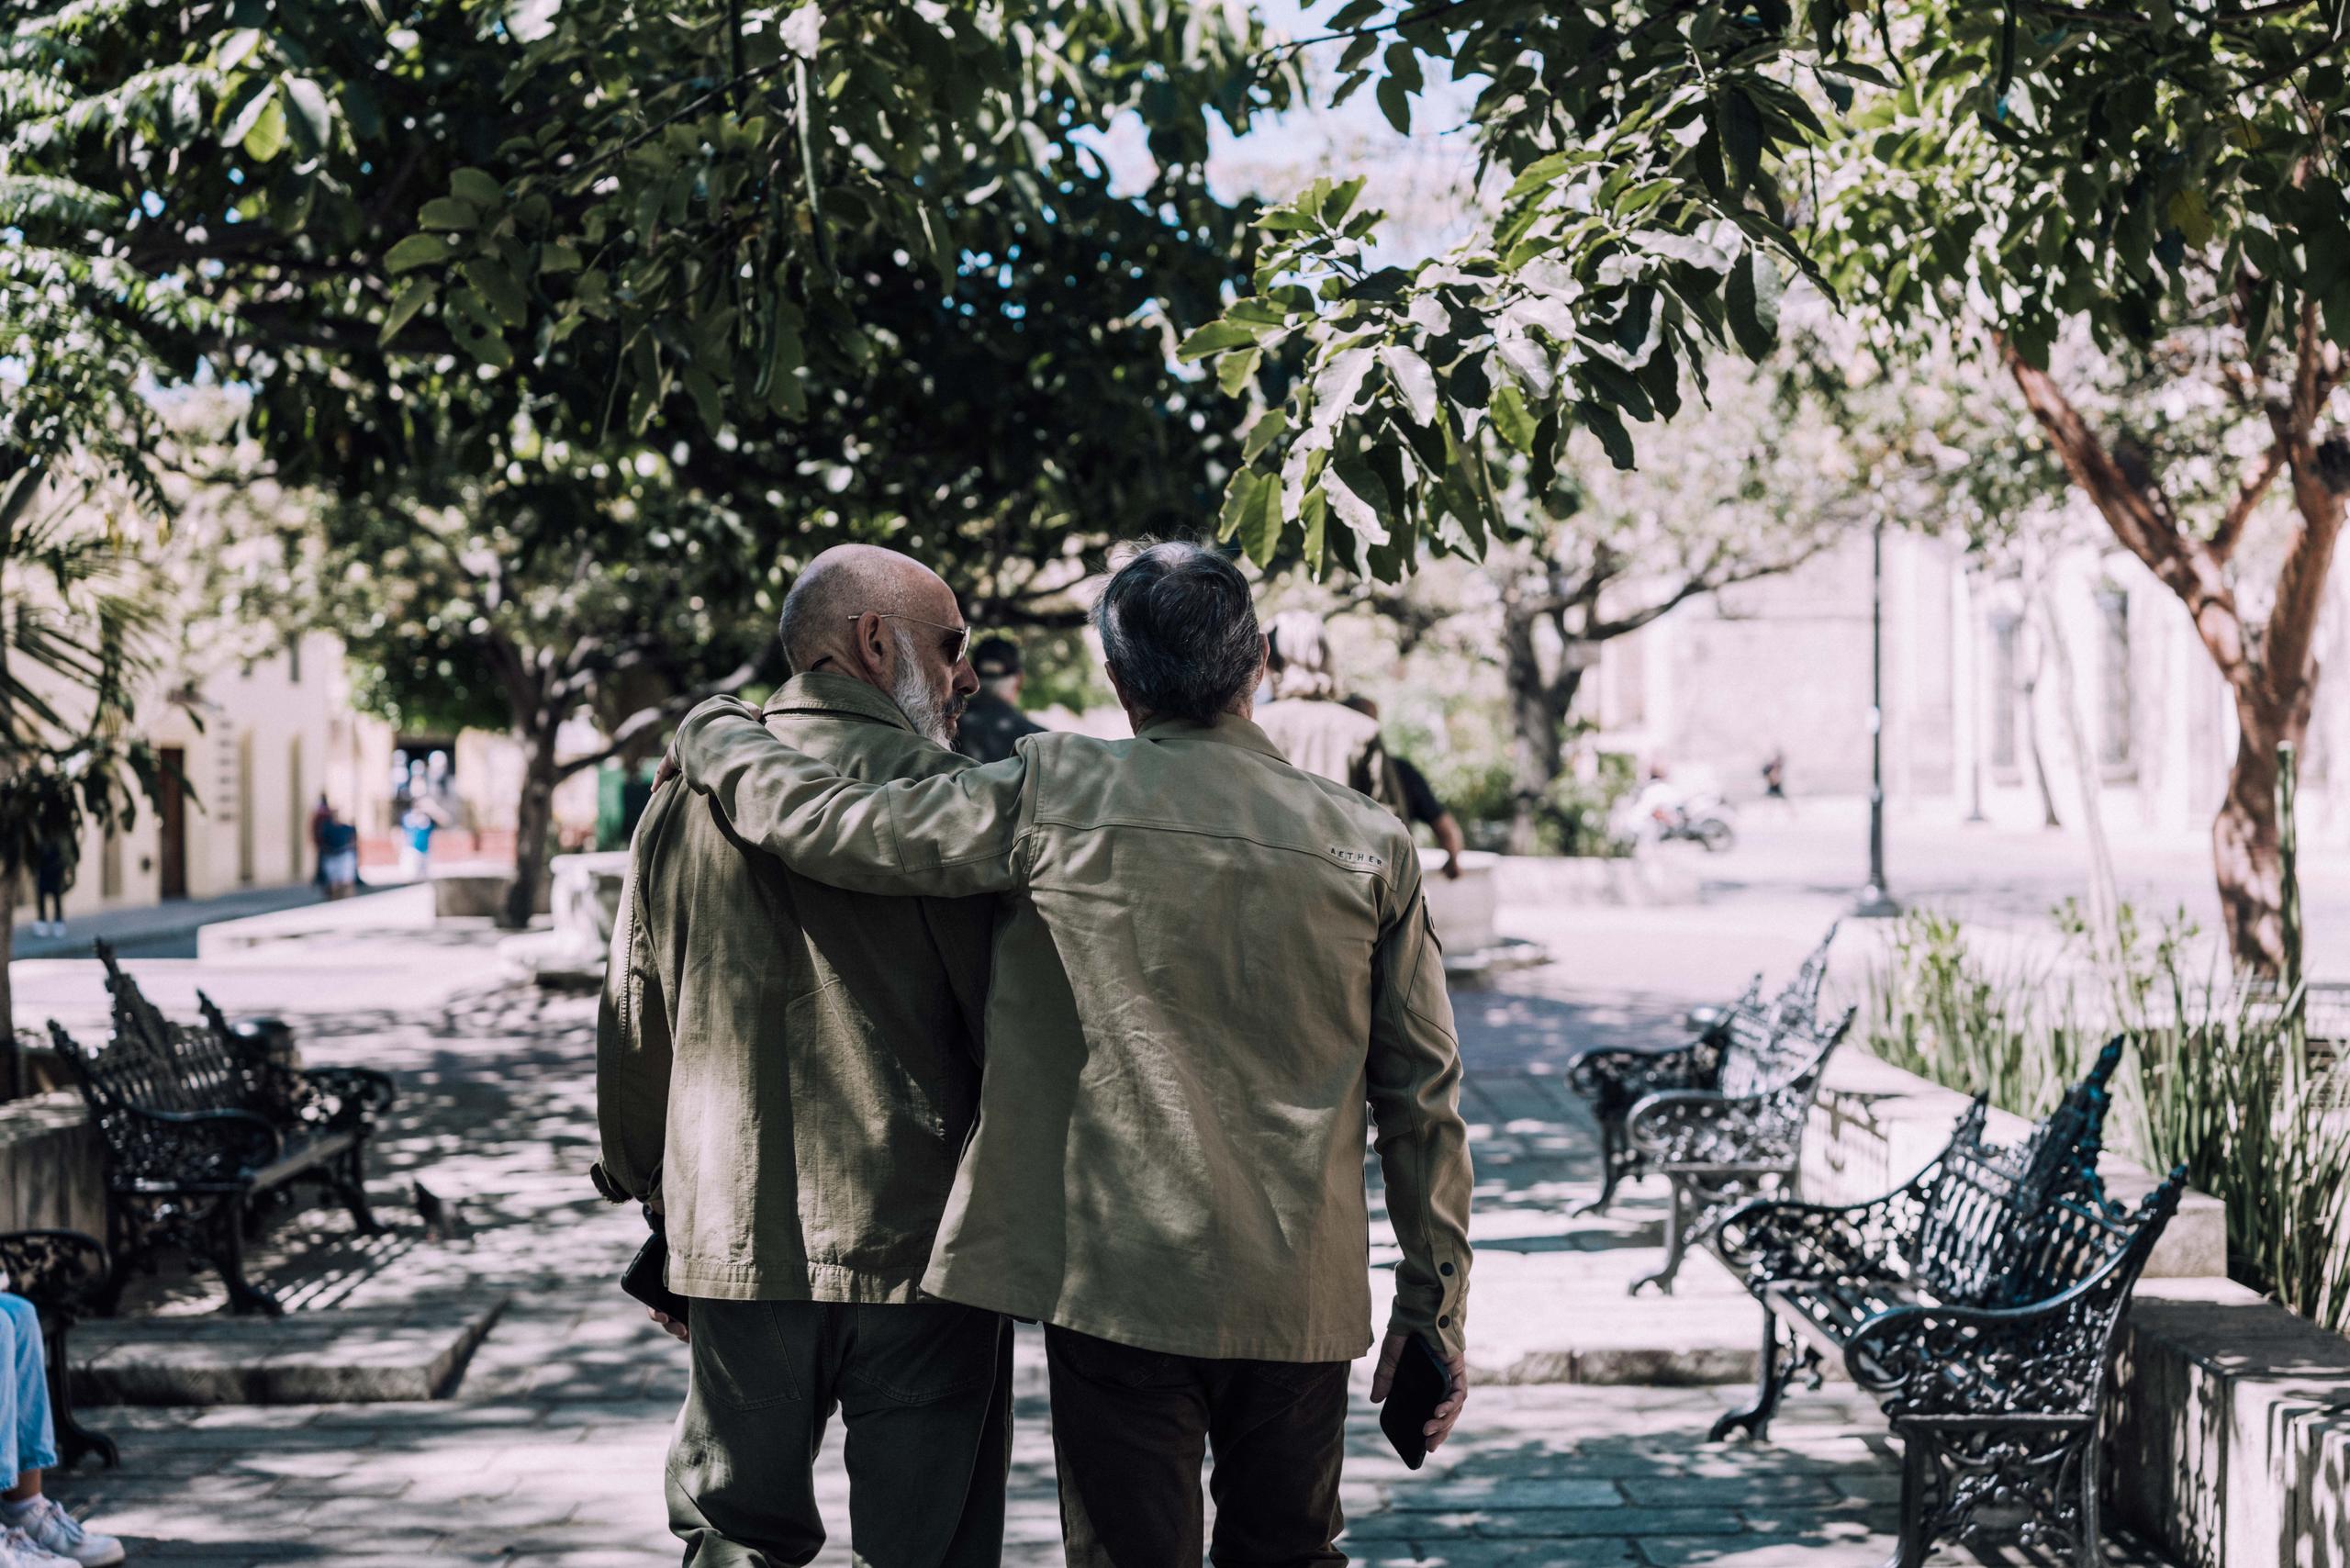 Two old friends walking in Mexico City